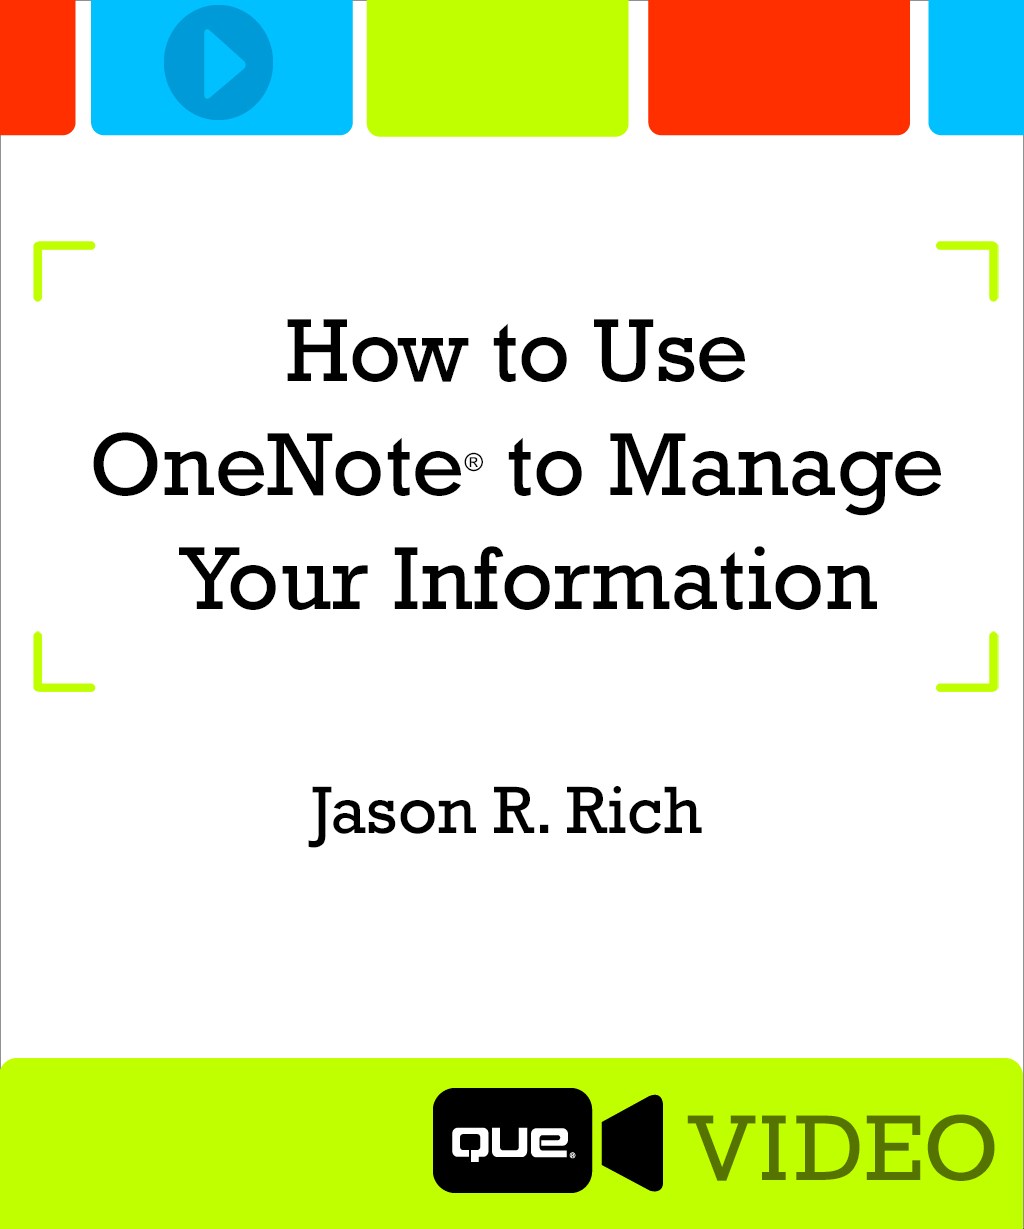 Part 1: Getting Started Using Microsoft OneNote